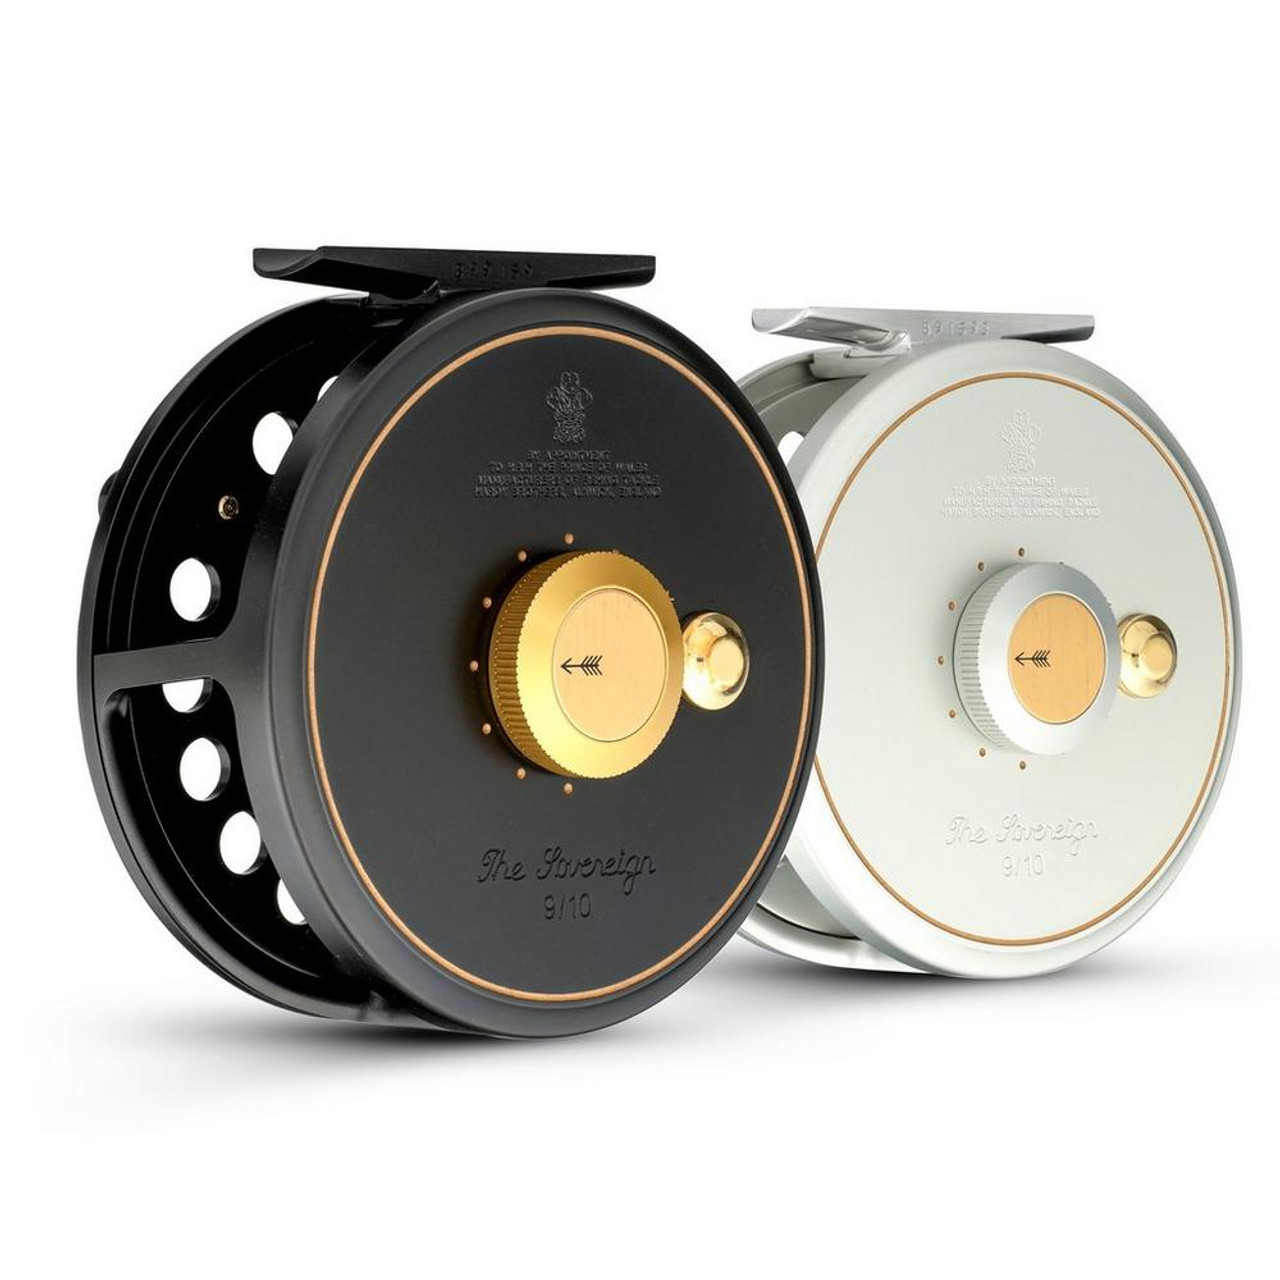 Hardy Sovereign 2000 #7 Ltd Ed fly reel + s/spool new with case papers +